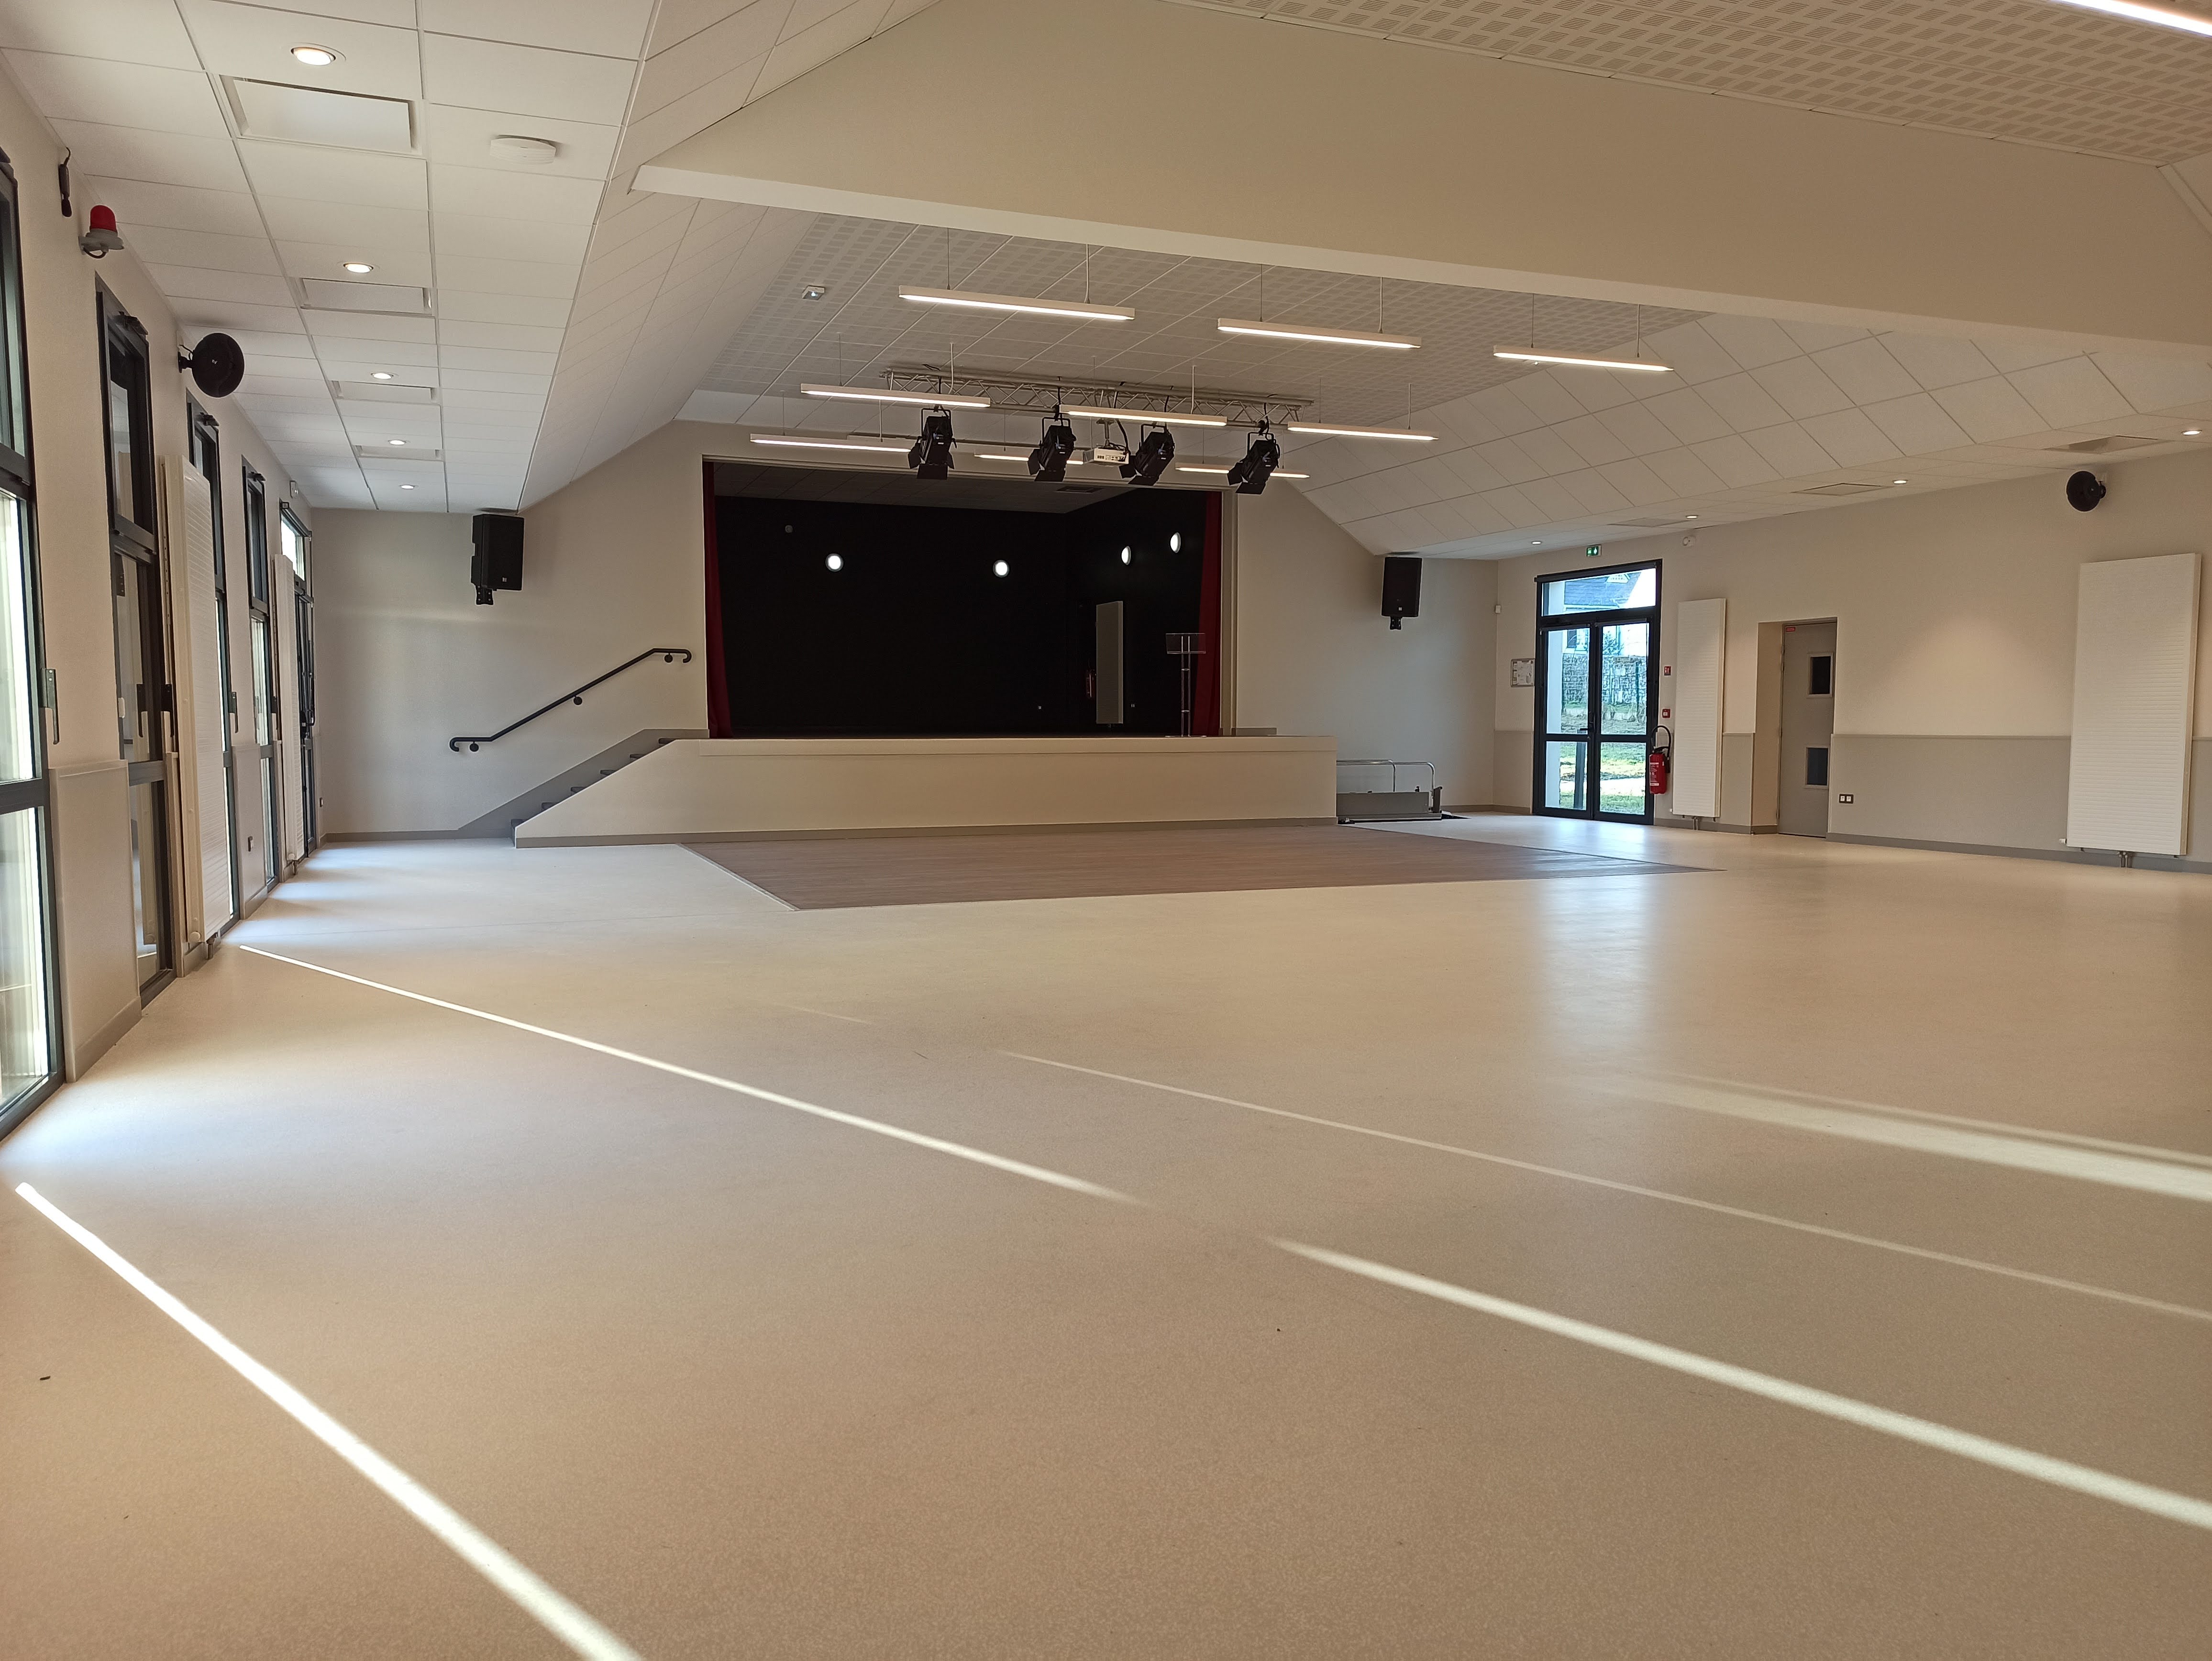 Salle communale multifonctions